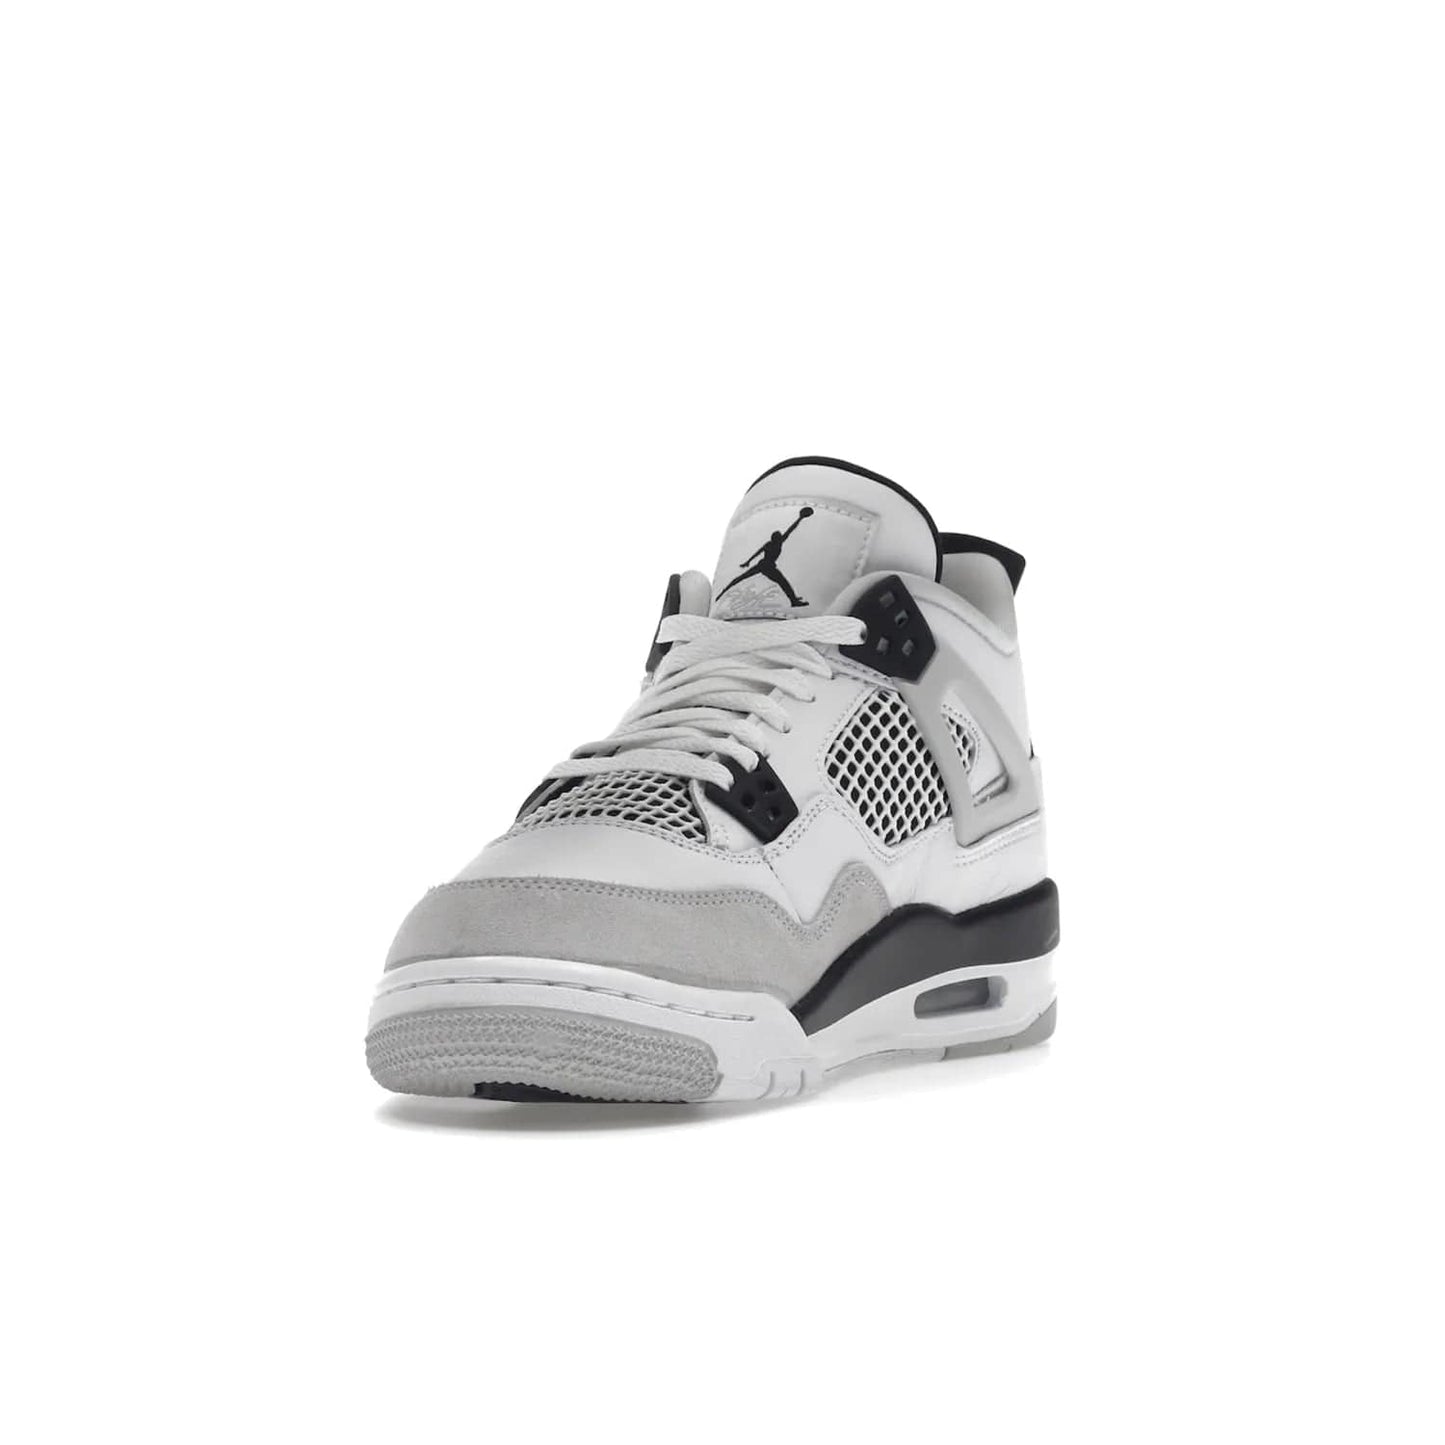 Jordan 4 Retro Military Black (GS) - Image 13 - Only at www.BallersClubKickz.com - A must-have for grade schoolers, the Air Jordan 4 Retro Military Black (GS) offers classic style with plenty of breathable support. Featuring a white sole and base with suede and leather overlays in subtle black and grey tones, the shoes are perfect for active pursuits and everyday comfort. Get an instant classic today!